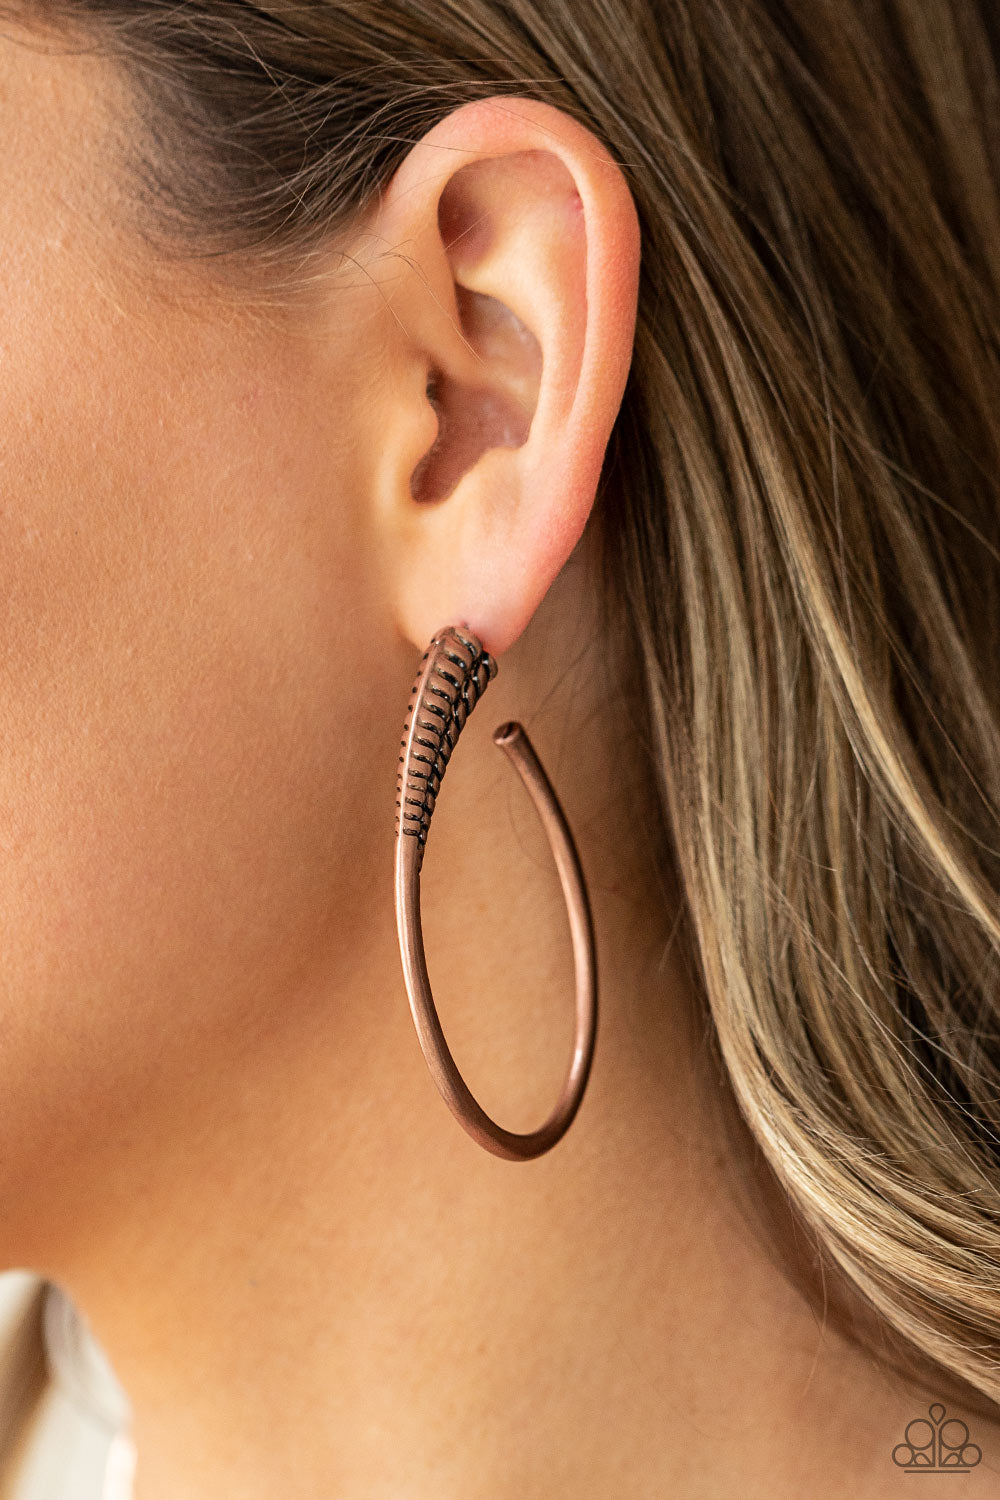 Fully Loaded Copper Hoop Earring - Paparazzi Accessories  A spiral of texture resembling a coil anchors an exaggerated oblong copper hoop that wraps around the ear. The high-sheen finish on the curved bar adds a hint of drama, as it refracts the light in a knockout finish. Earring attaches to a standard post fitting. Hoop measures approximately 1 1/2" in diameter.  All Paparazzi Accessories are lead free and nickel free!  Sold as one pair of hoop earrings.